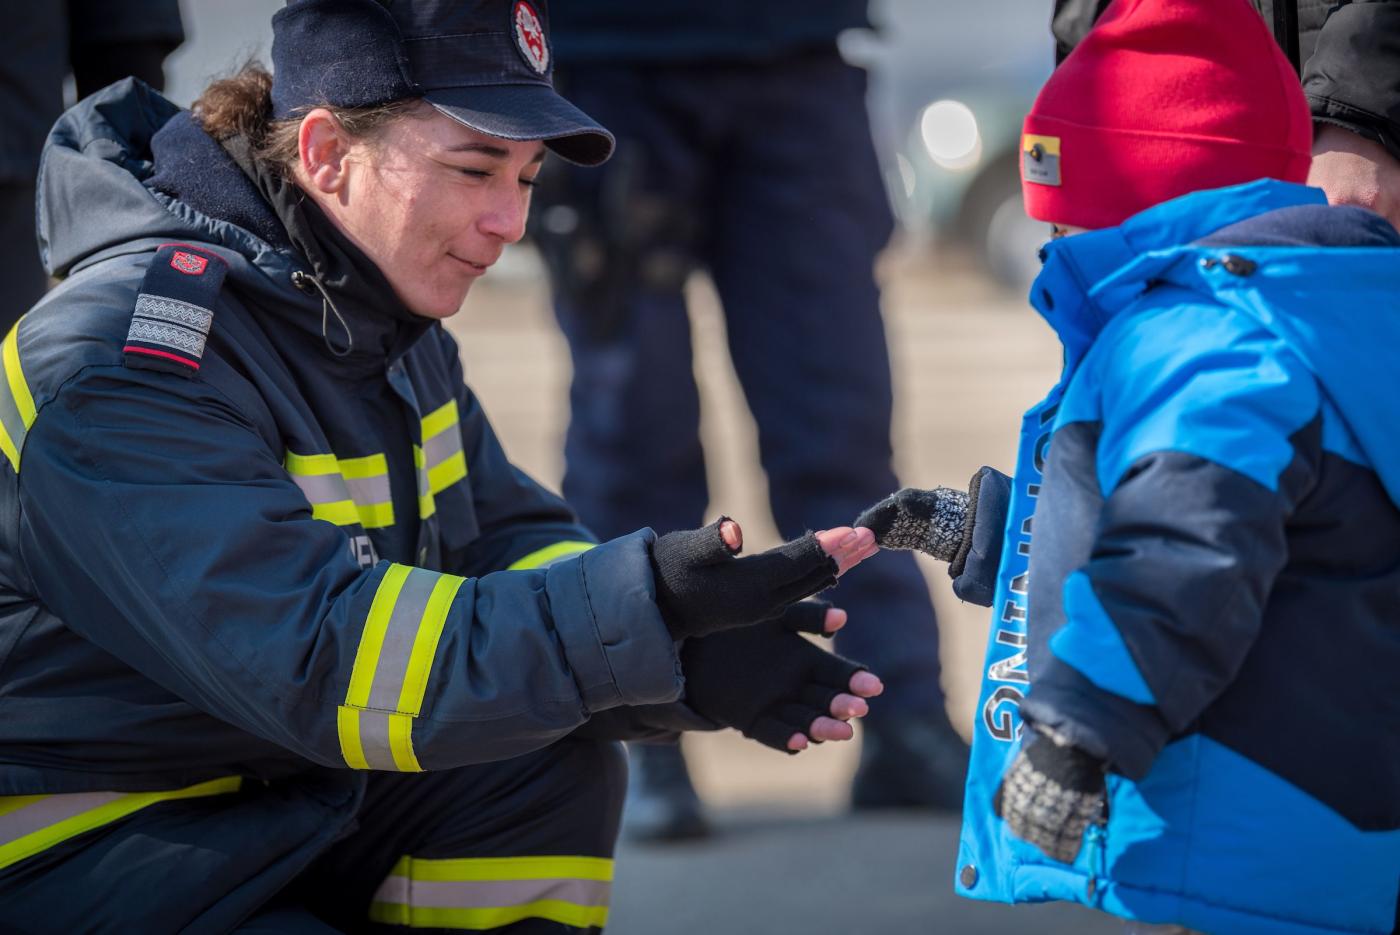 A woman firefighter greets a young refugee child from Ukraine as he arrives at the Vama Siret border crossing, Romania. The Vama Siret border crossing connects northeast Romania with Ukraine. Located north of Siret and further in the south the city of Suceava, the crossing connects Romania with the Ukrainian village of Terebleche and further north the city of Chernivtsi. Following the invasion of Ukraine by Russian military starting on 24 February 2022, close to half a million refugees have fled across the 